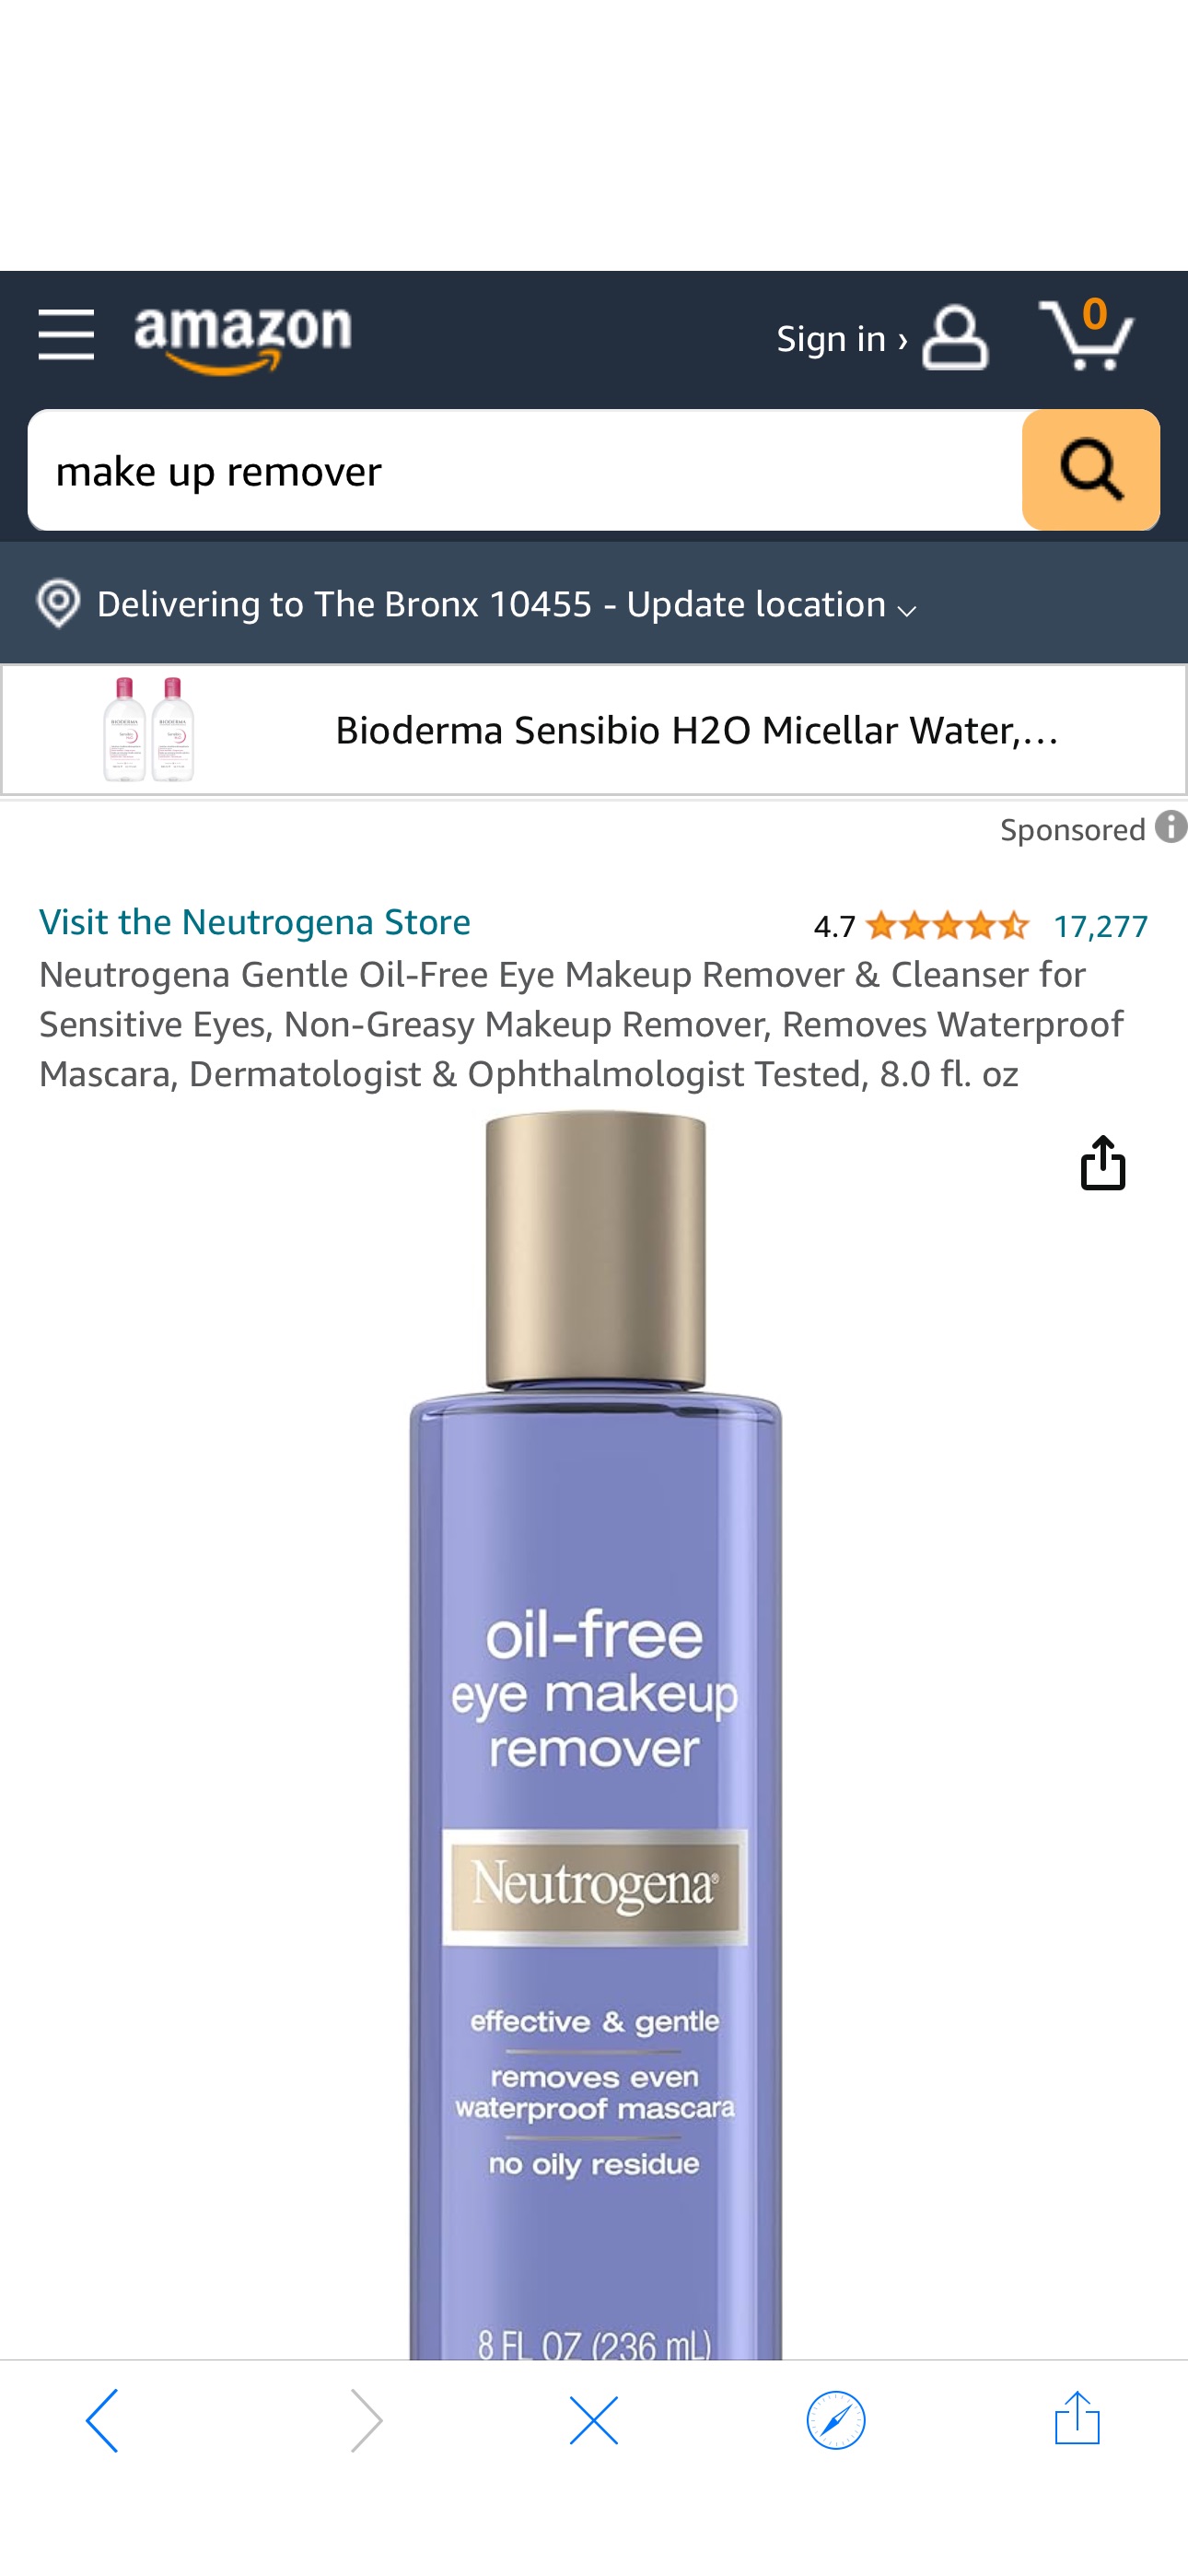 Amazon.com: Neutrogena Gentle Oil-Free Eye Makeup Remover & Cleanser for Sensitive Eyes, Non-Greasy Makeup Remover, Removes Waterproof Mascara, Dermatologist & Ophthalmologist Tested, 8.0 fl. oz : Bea